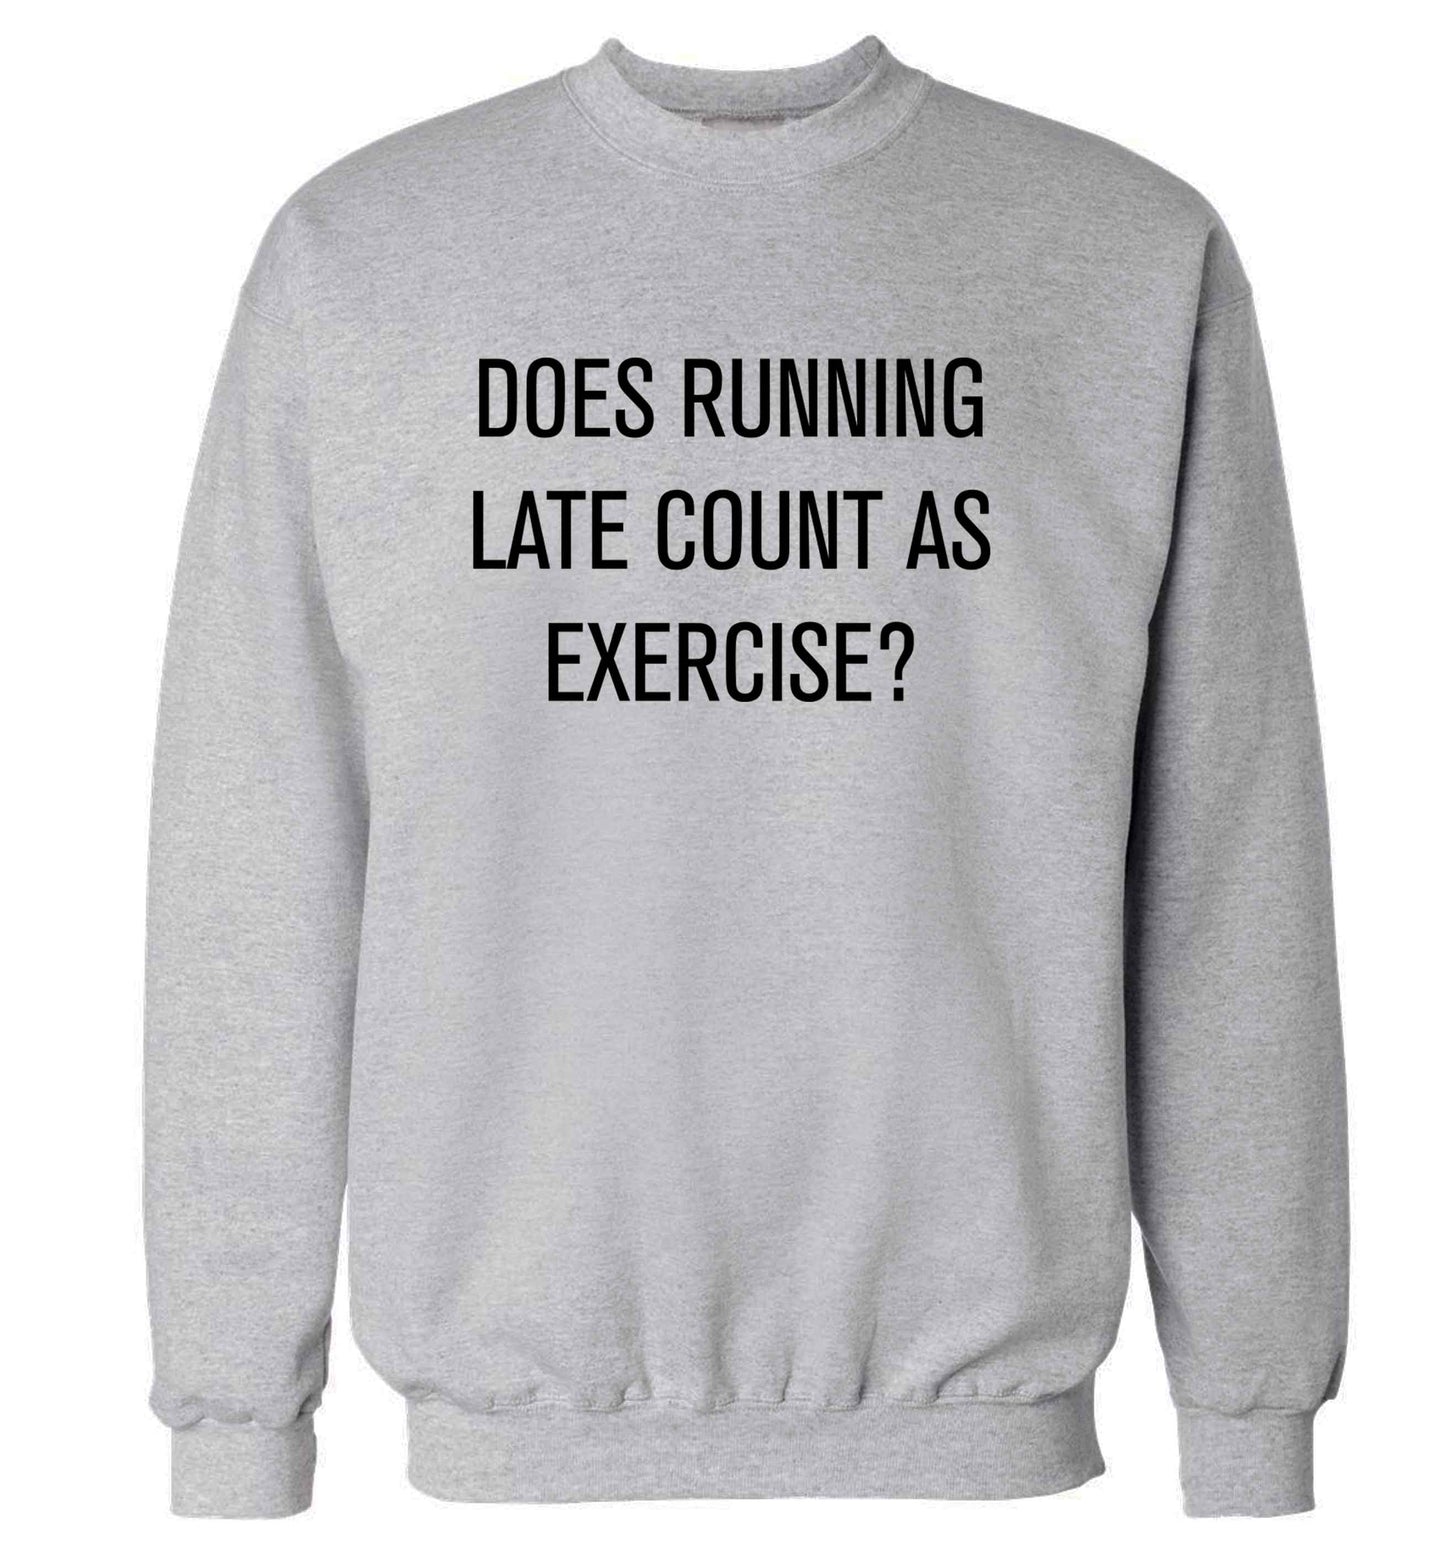 Does running late count as exercise? adult's unisex grey sweater 2XL